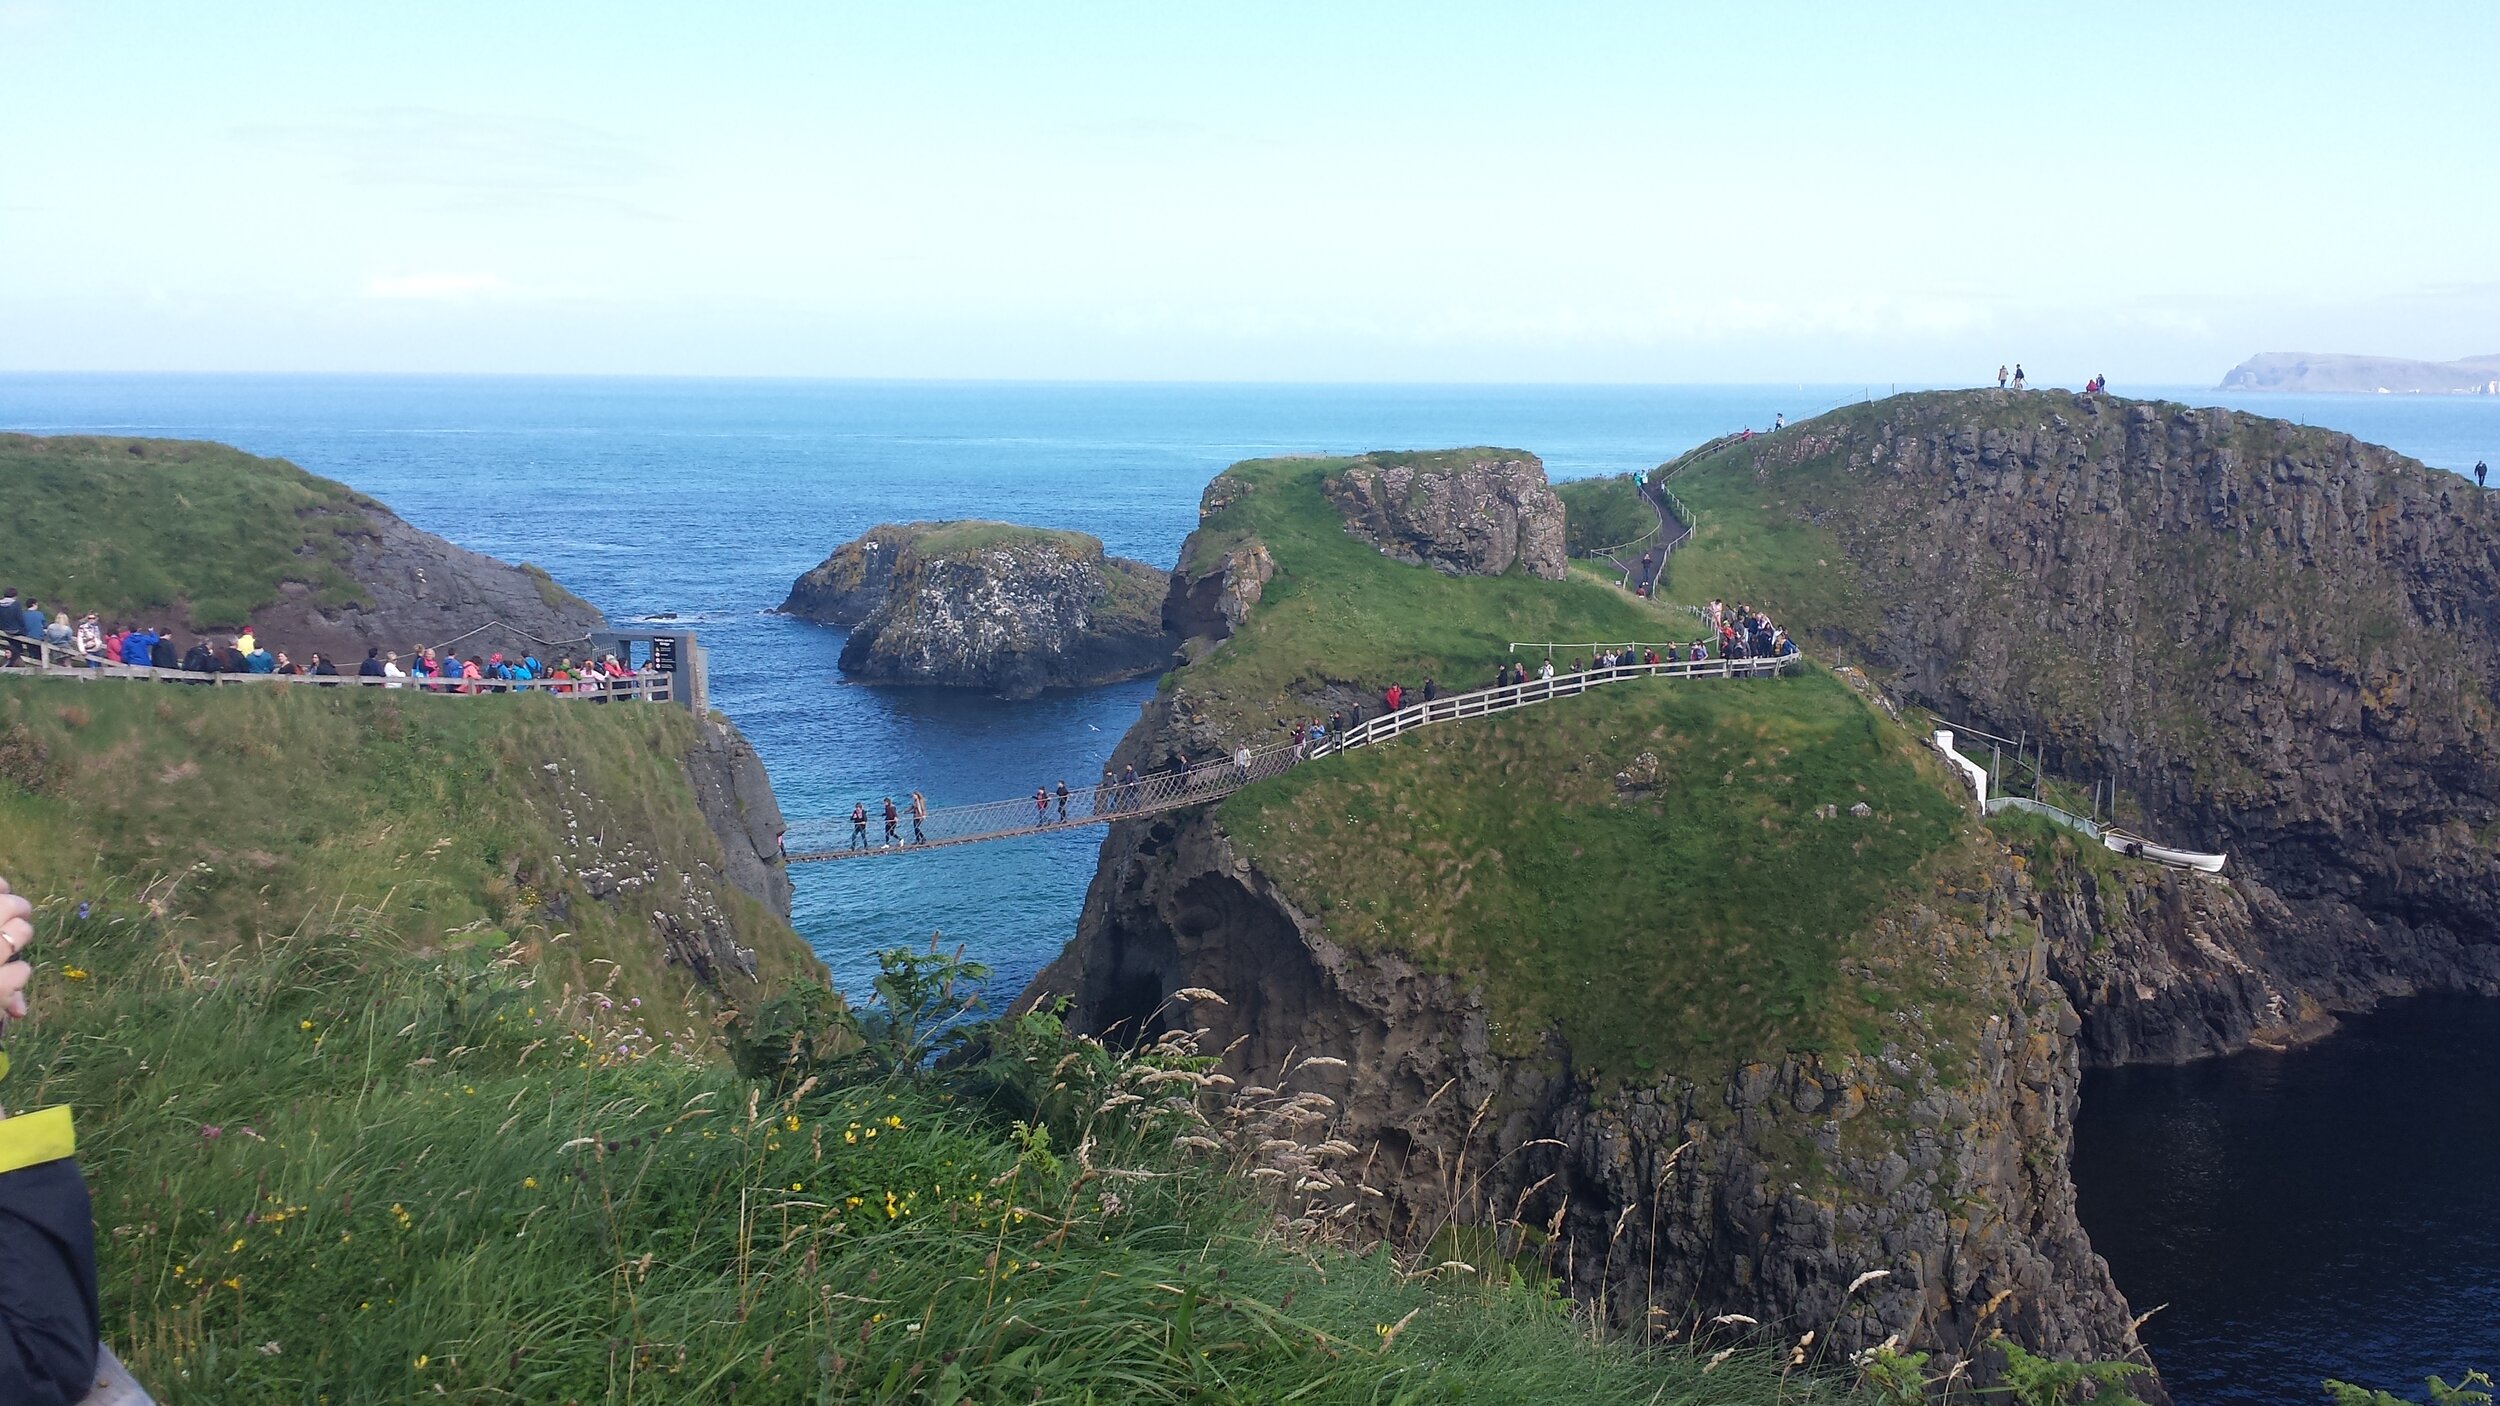 A photo of Carrick-a-Rede Rope Bridge in Ireland.